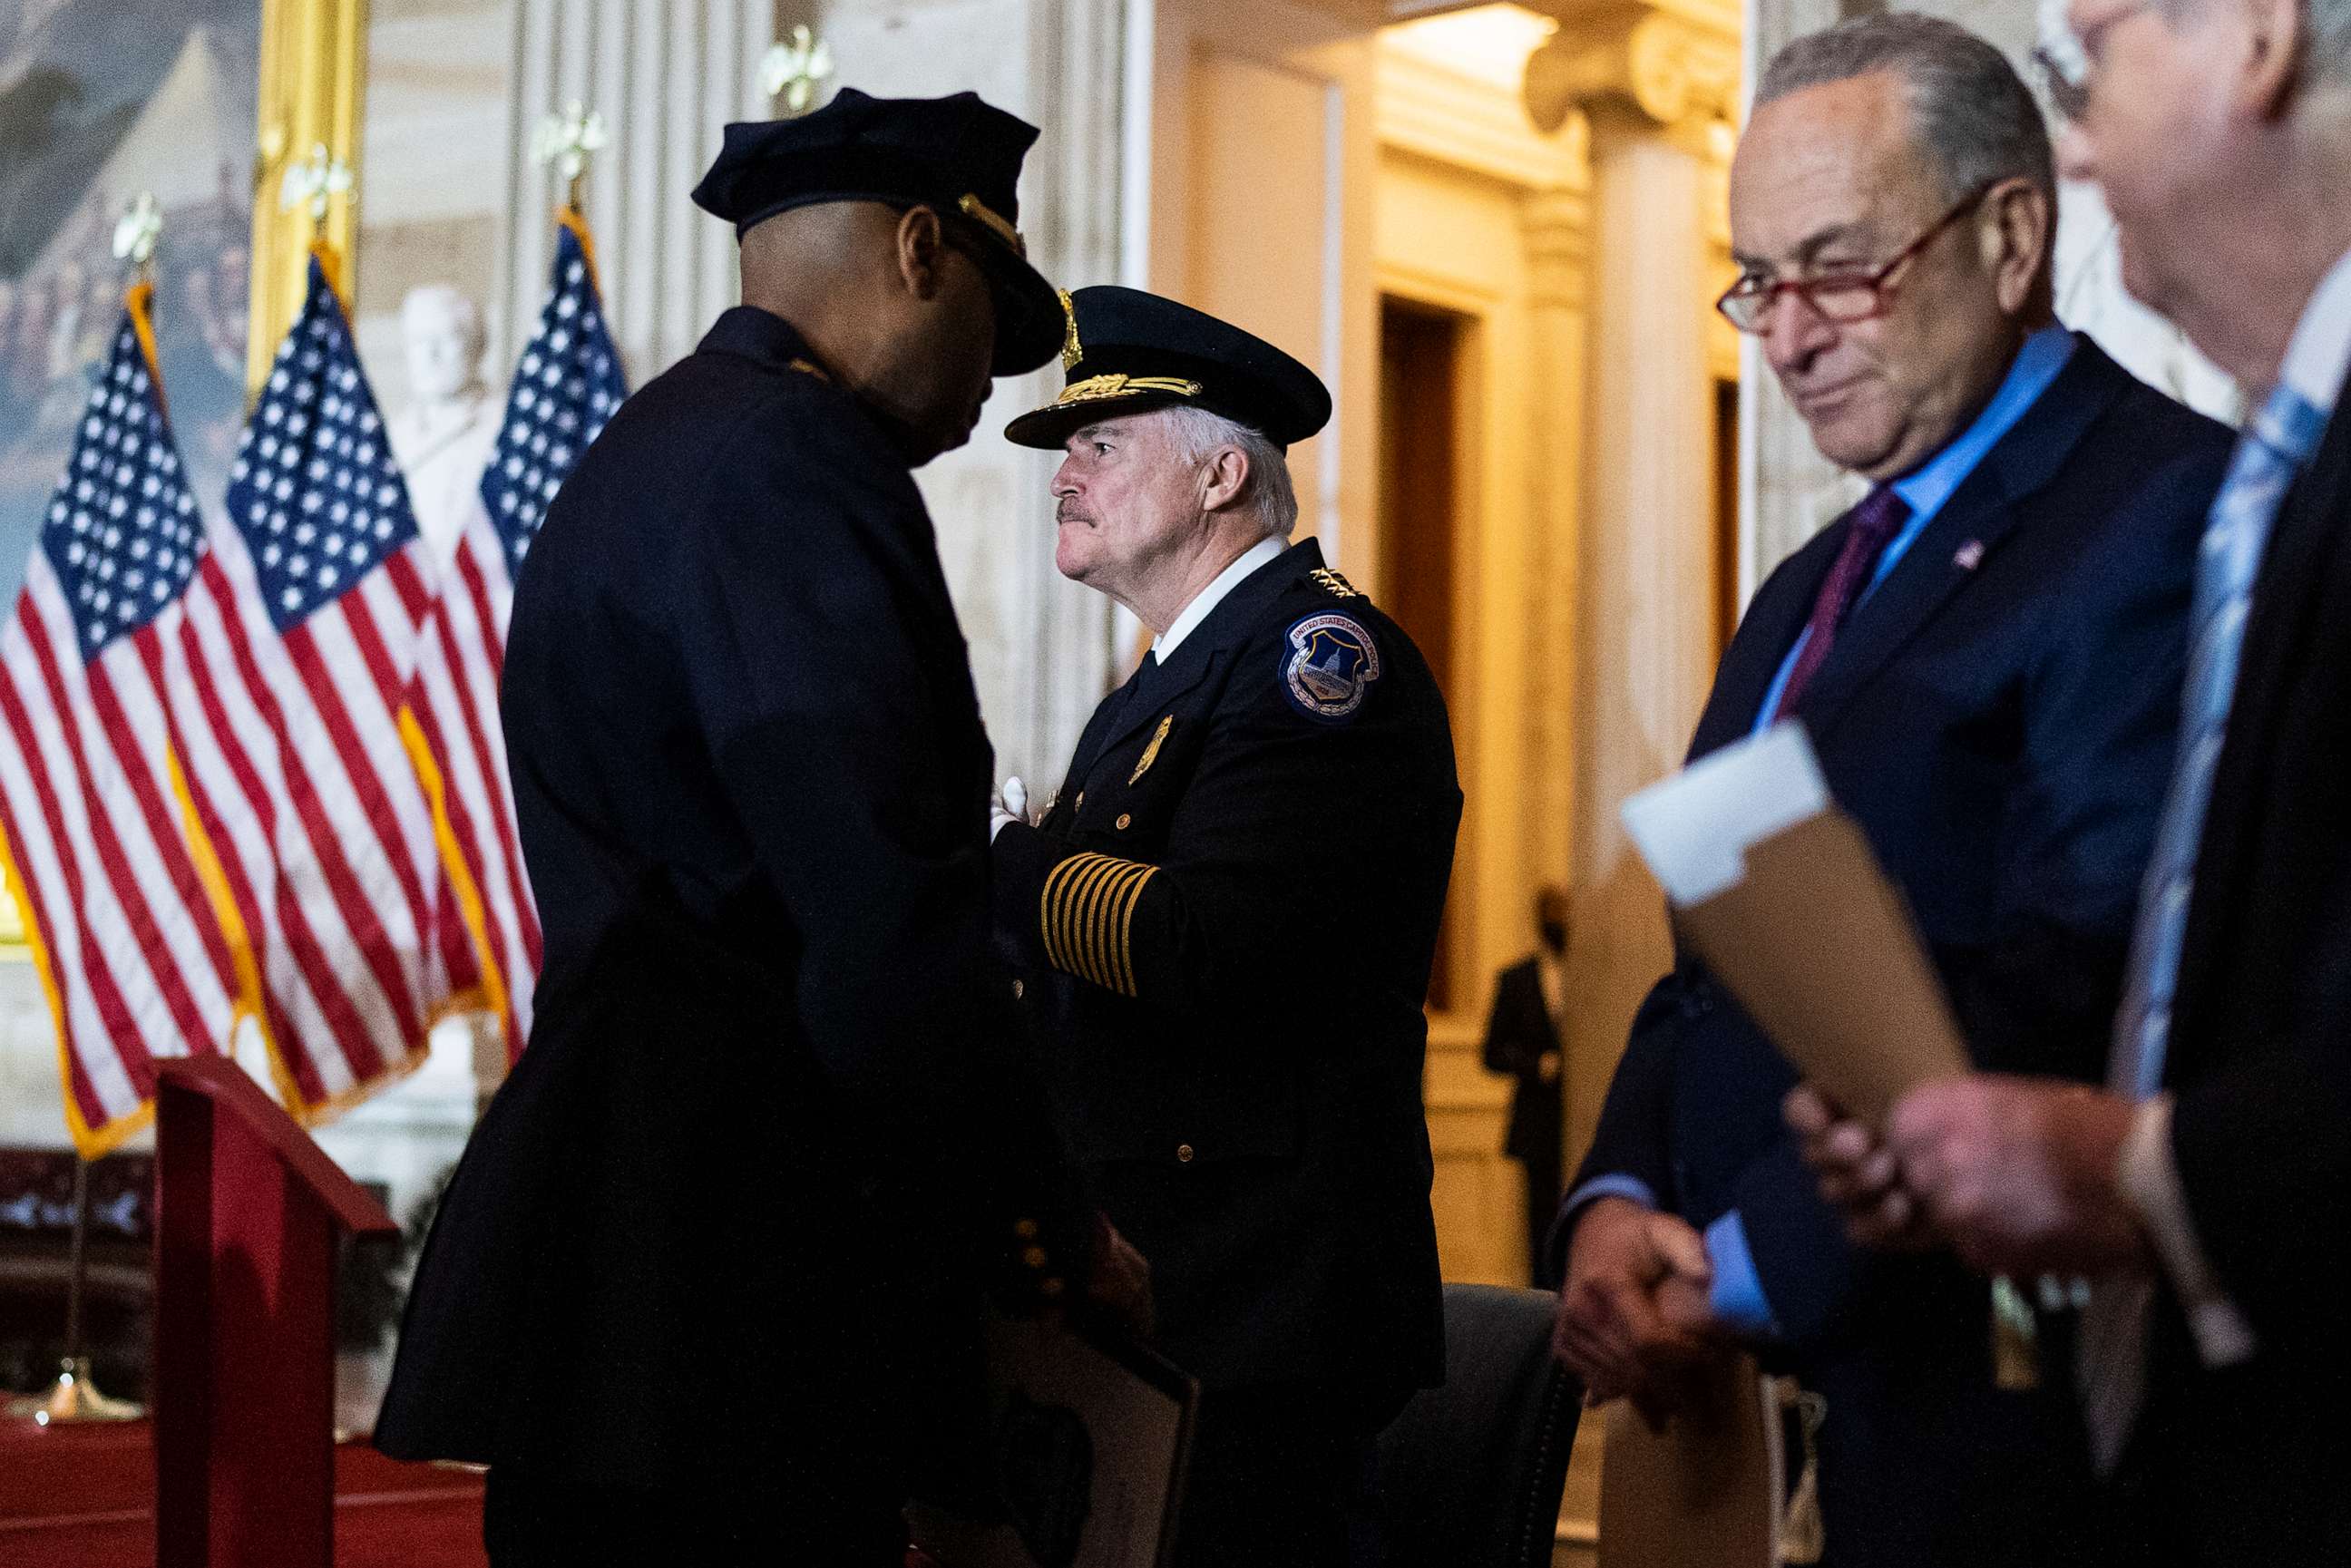 PHOTO: Capitol Police Chief Thomas Manger attends a ceremony to award the Congressional Gold Medal to the United States Capitol Police, the Washington D.C. Metropolitan Police and the heroes of January 6th, in the Capitol Rotunda, Dec. 6, 2022.